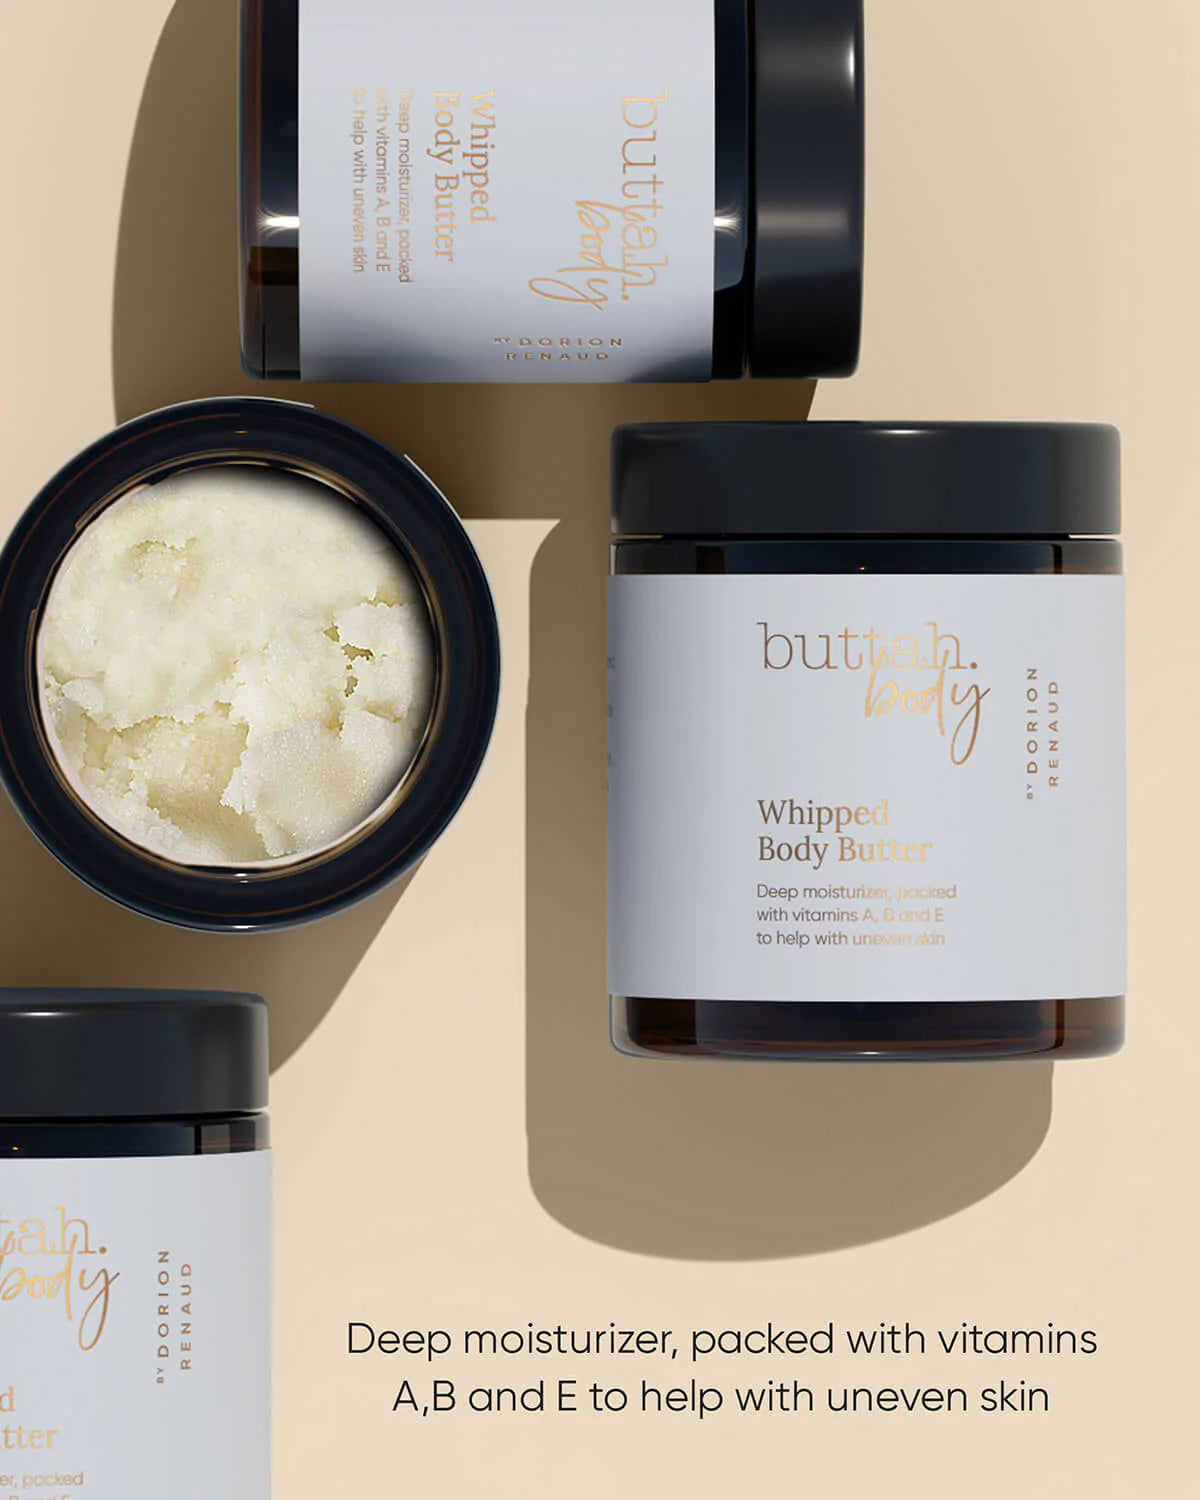 Scented Whipped Body Butter Deep Skin Moisturizer with vitamins A, B and E for uneven skin